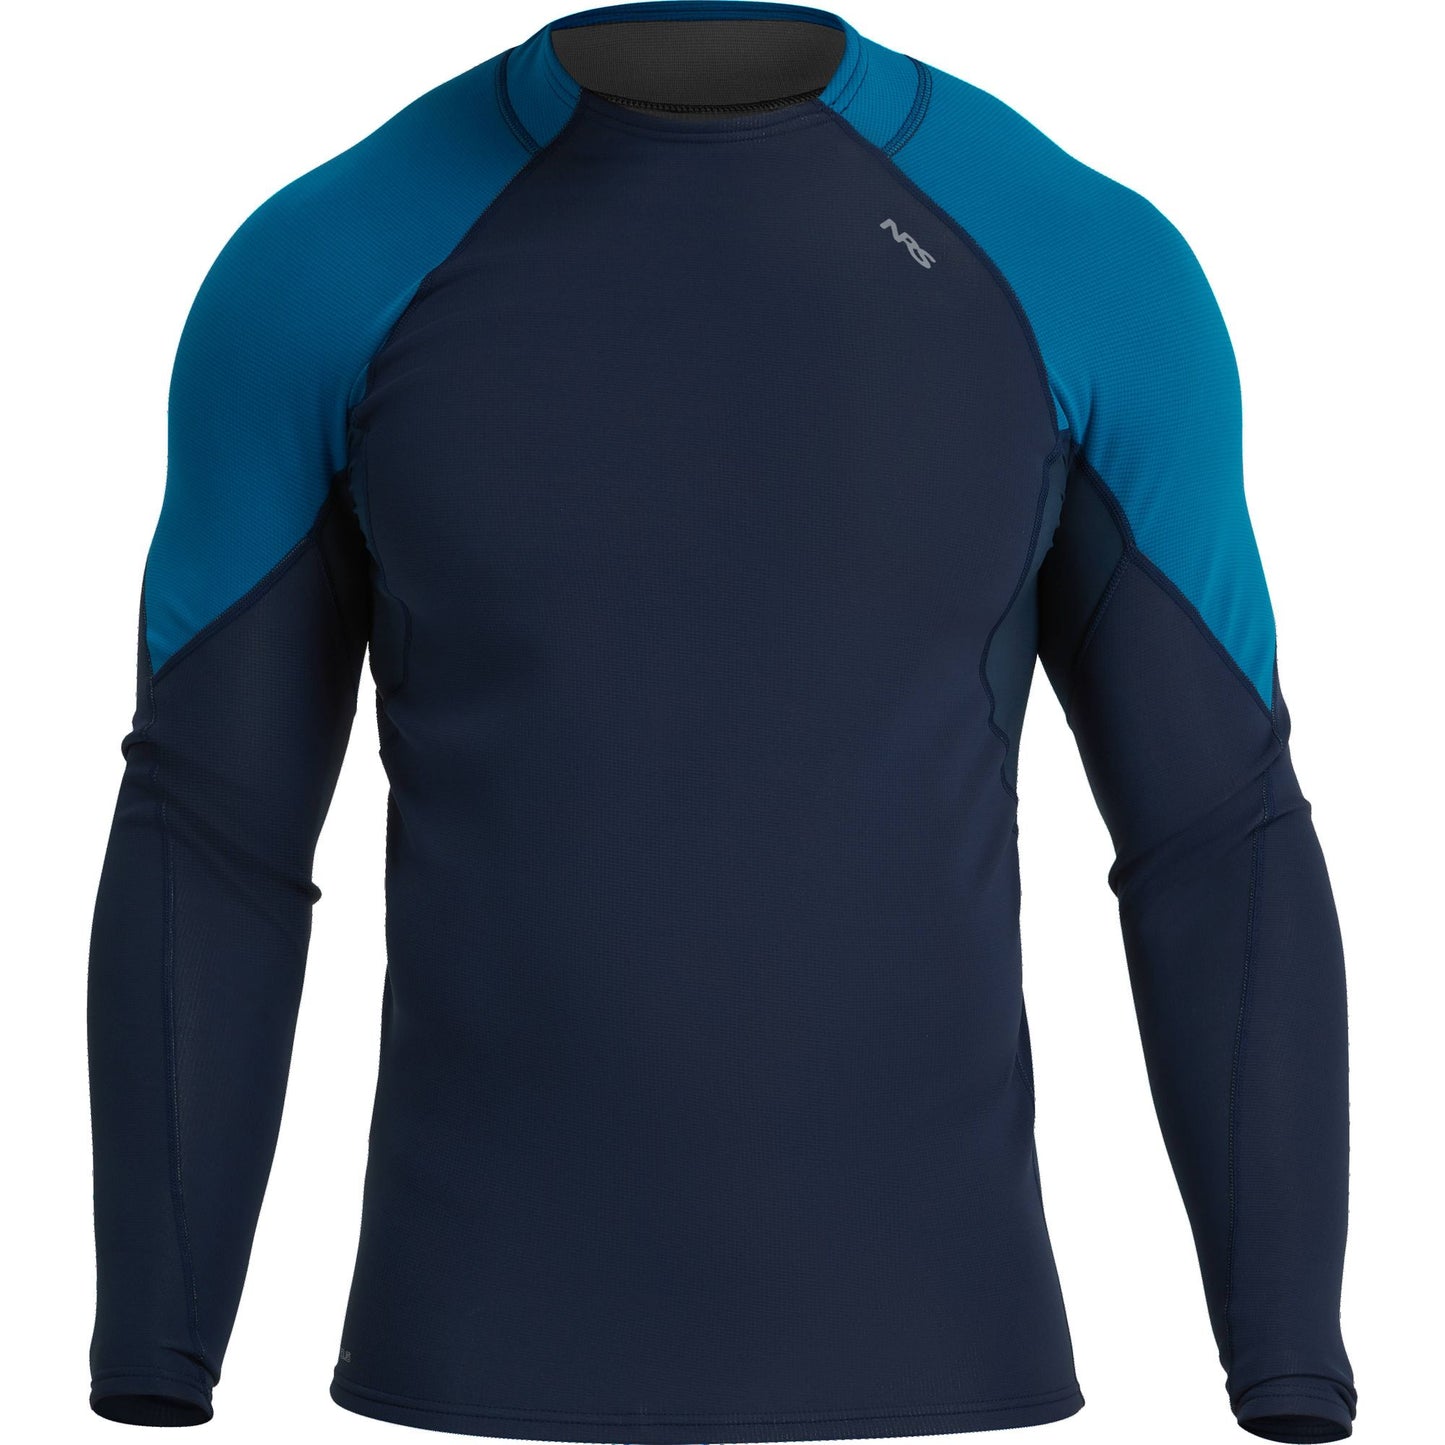 The Hydroskin 0.5 Long Sleeve Shirt - Men's from NRS is a blue insulating top.